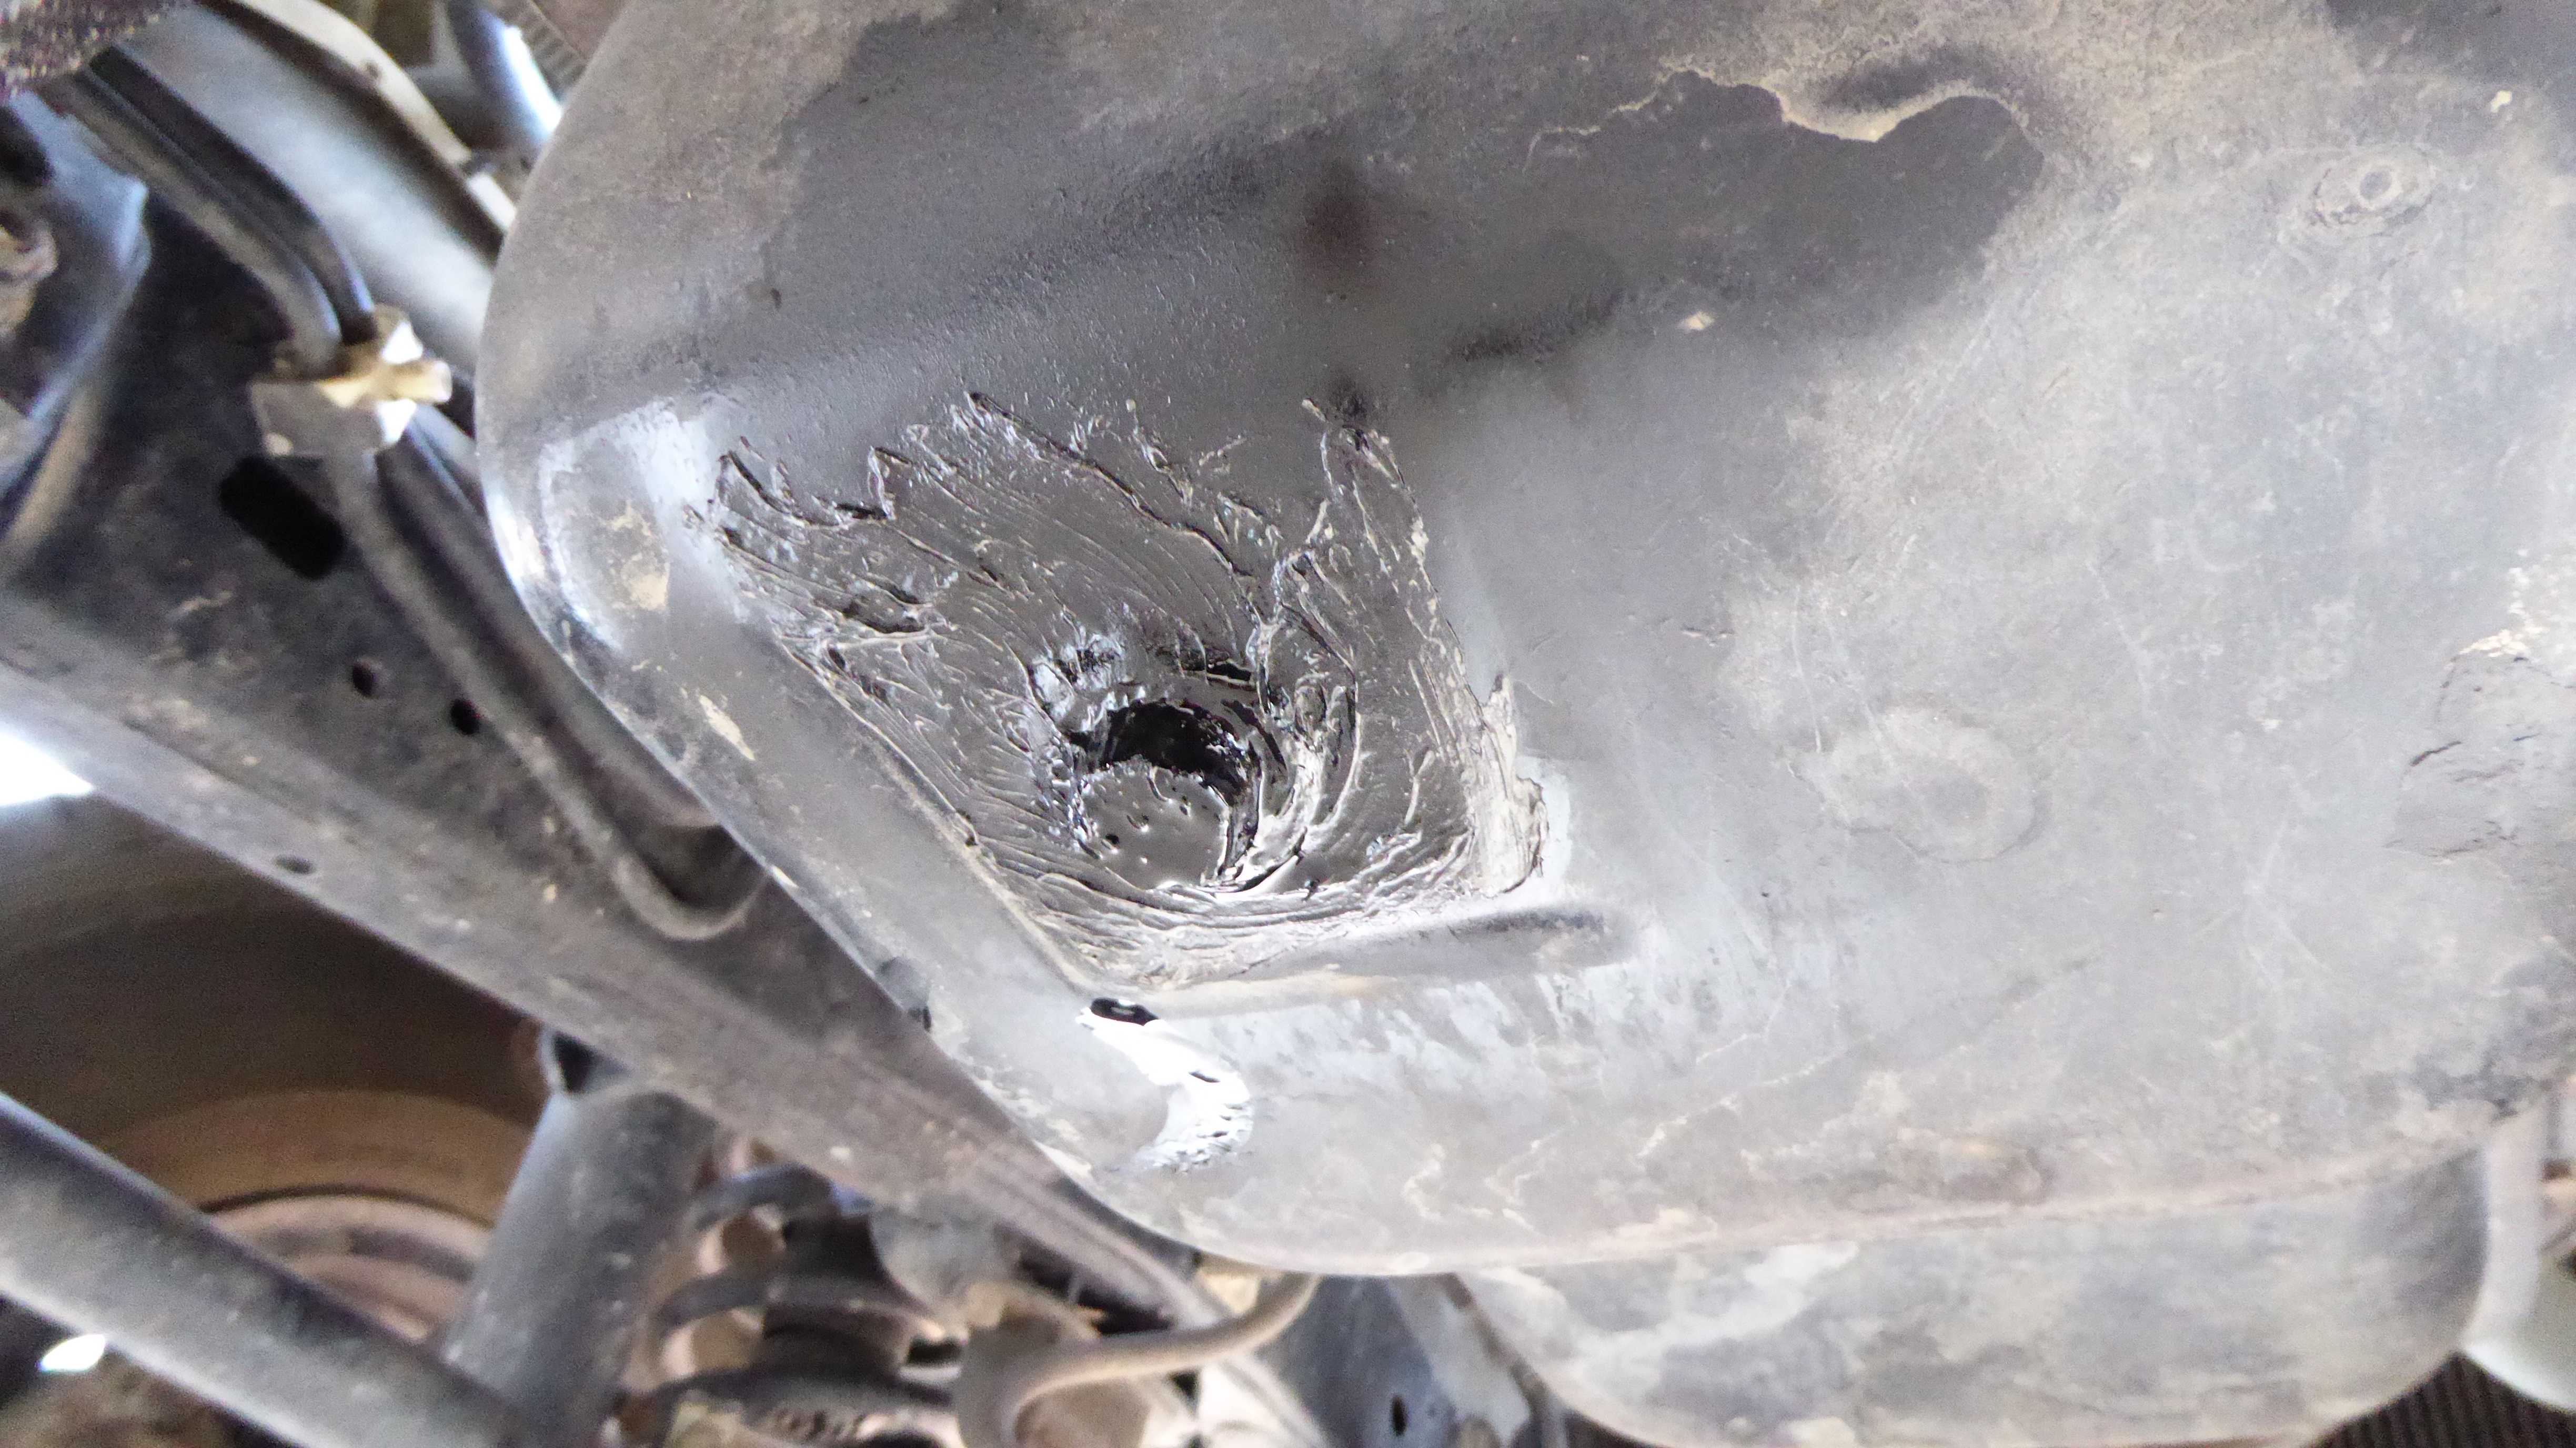 Source of oil leak: And oil drain plug, sealed with silicone. This is not a Toyota approved method of repairing a leaking oil plug. 